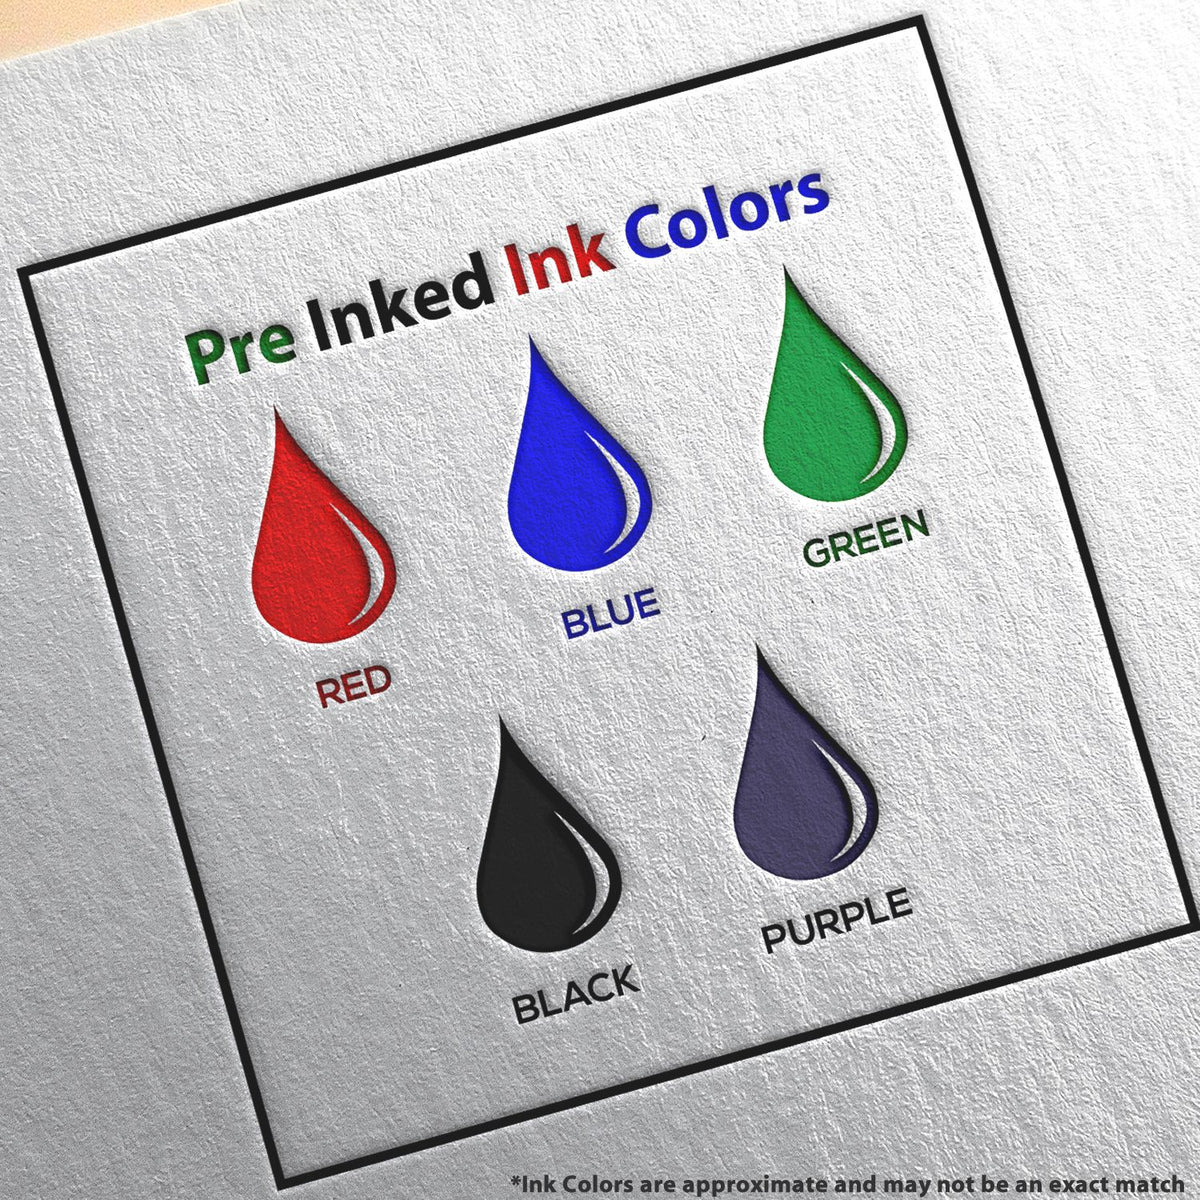 A picture showing the different ink colors or hues available for the Super Slim Minnesota Notary Public Stamp product.